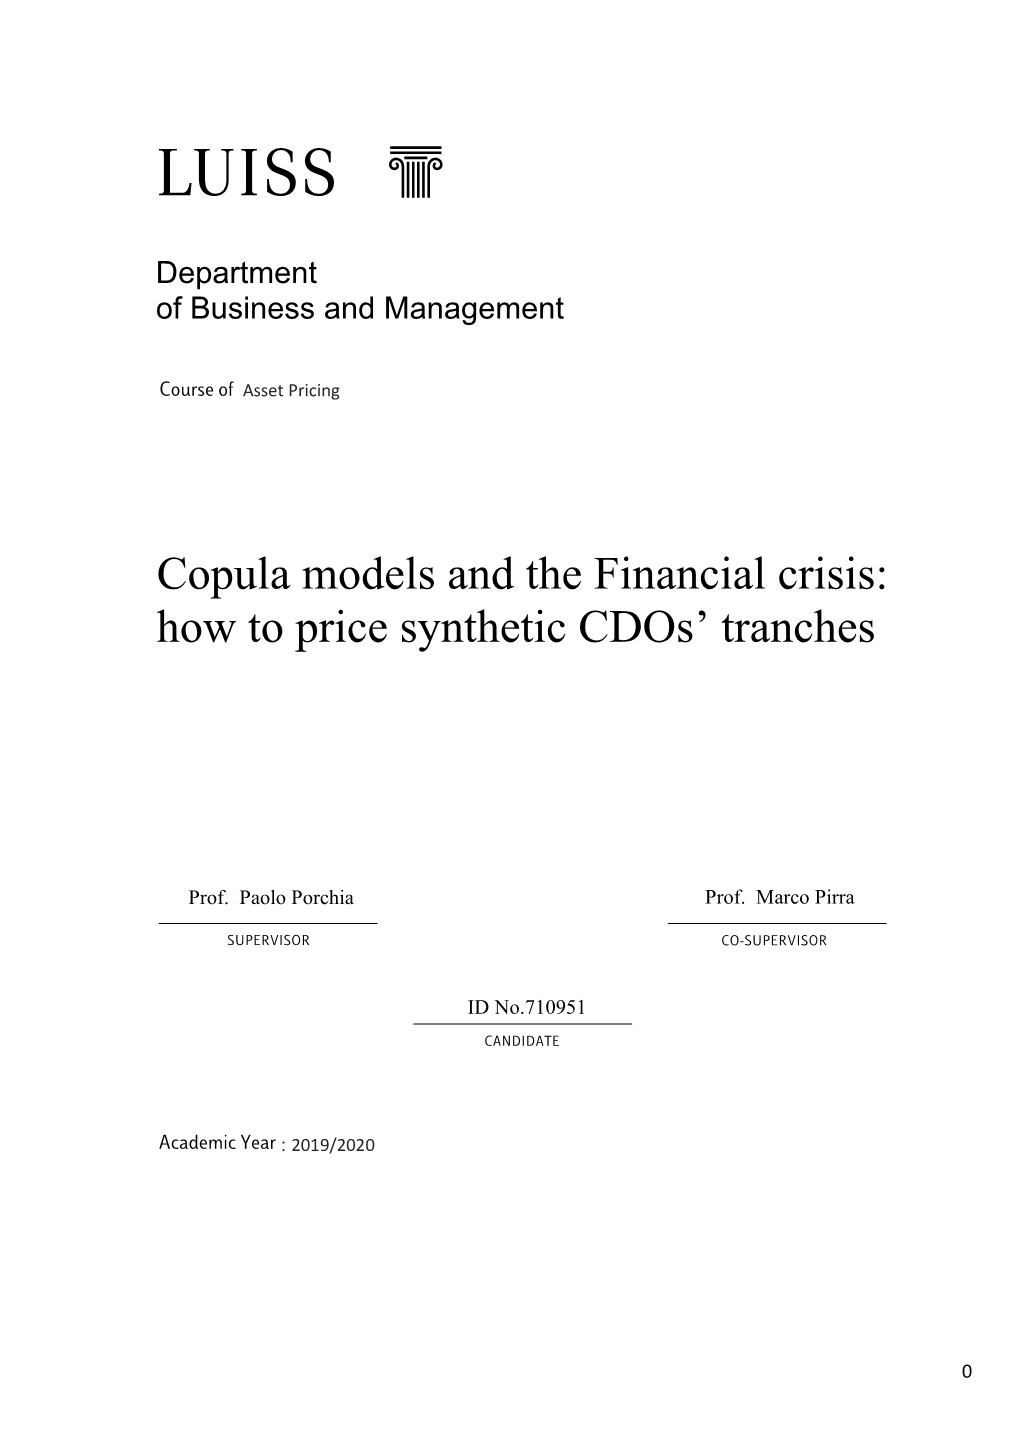 Copula Models and the Financial Crisis: How to Price Synthetic Cdos’ Tranches